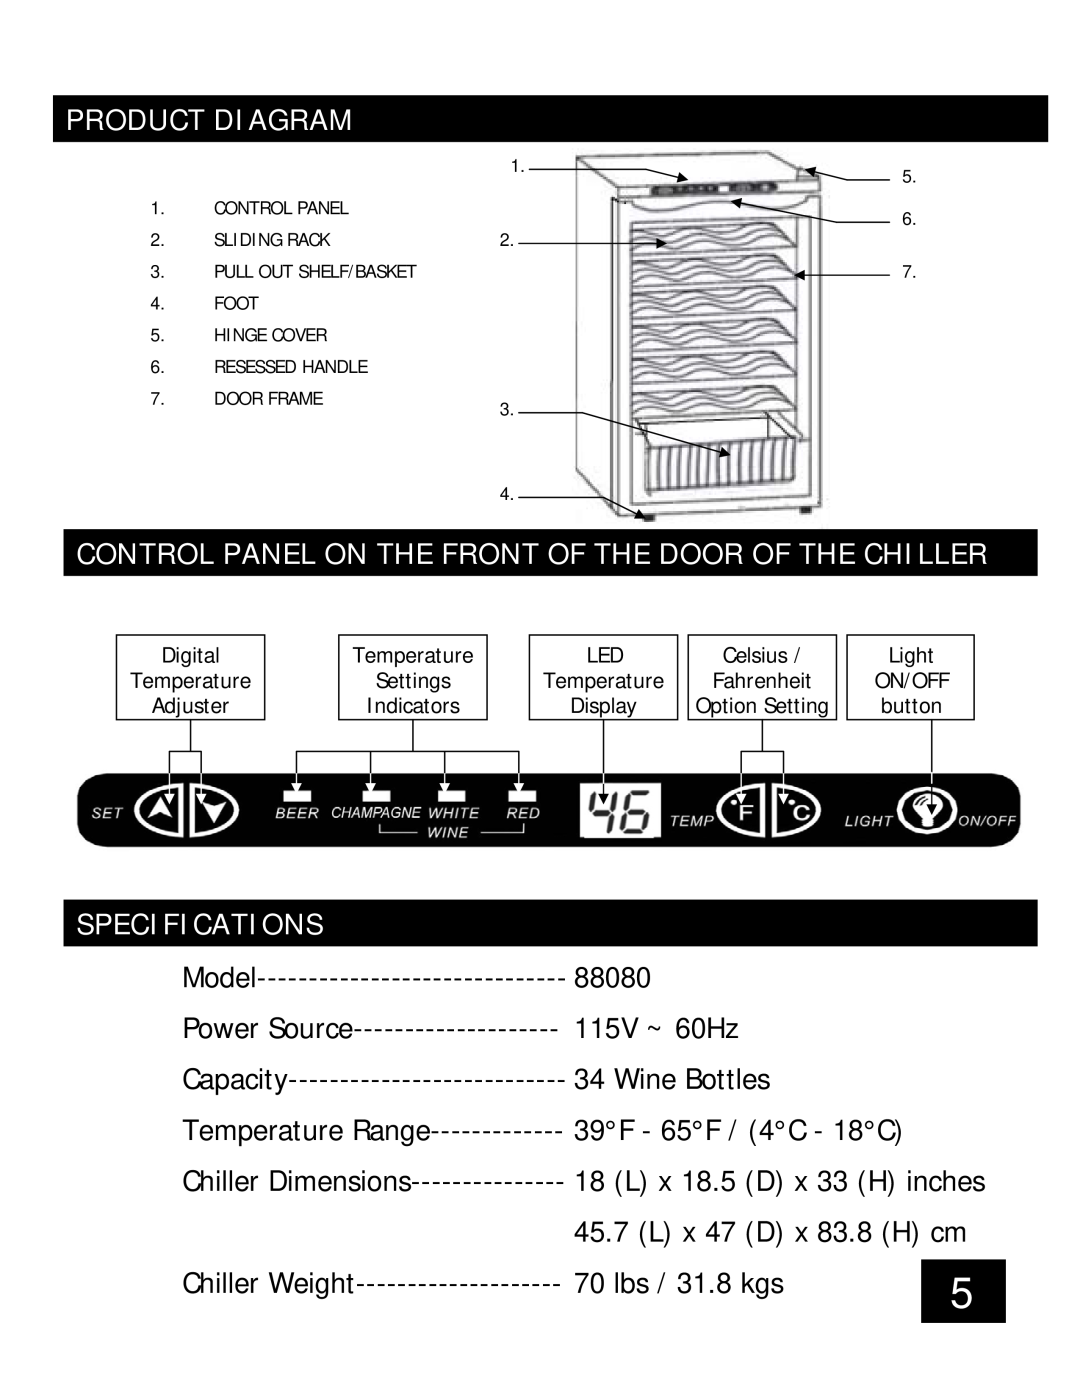 Honeywell 88080 Product Diagram, Control Panel On The Front Of The Door Of The Chiller, Specifications 